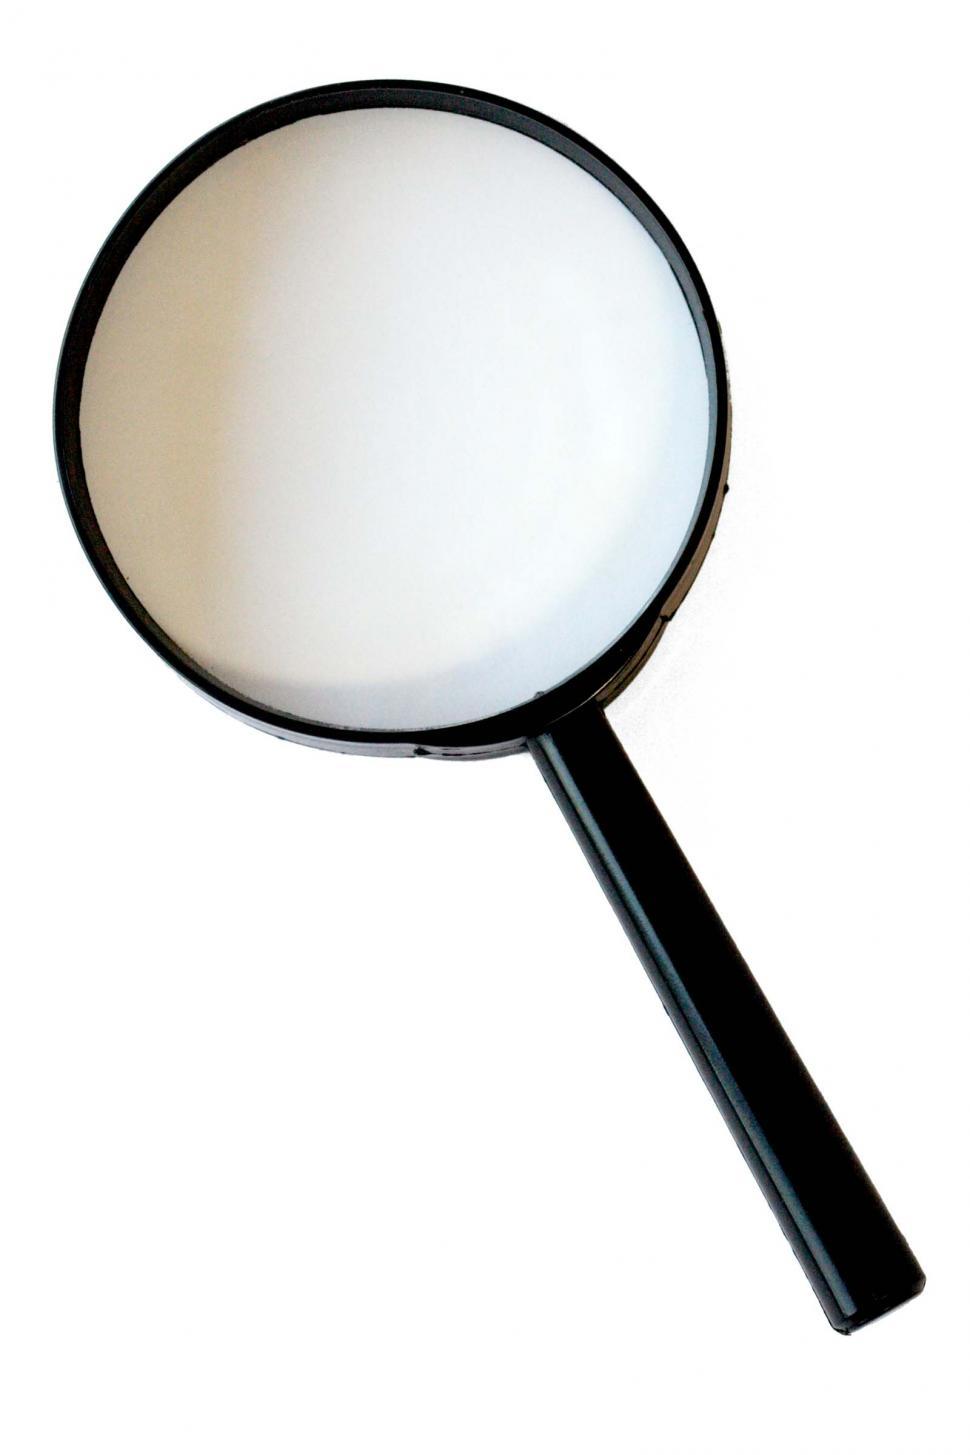 Free Image of Magnifying glass 